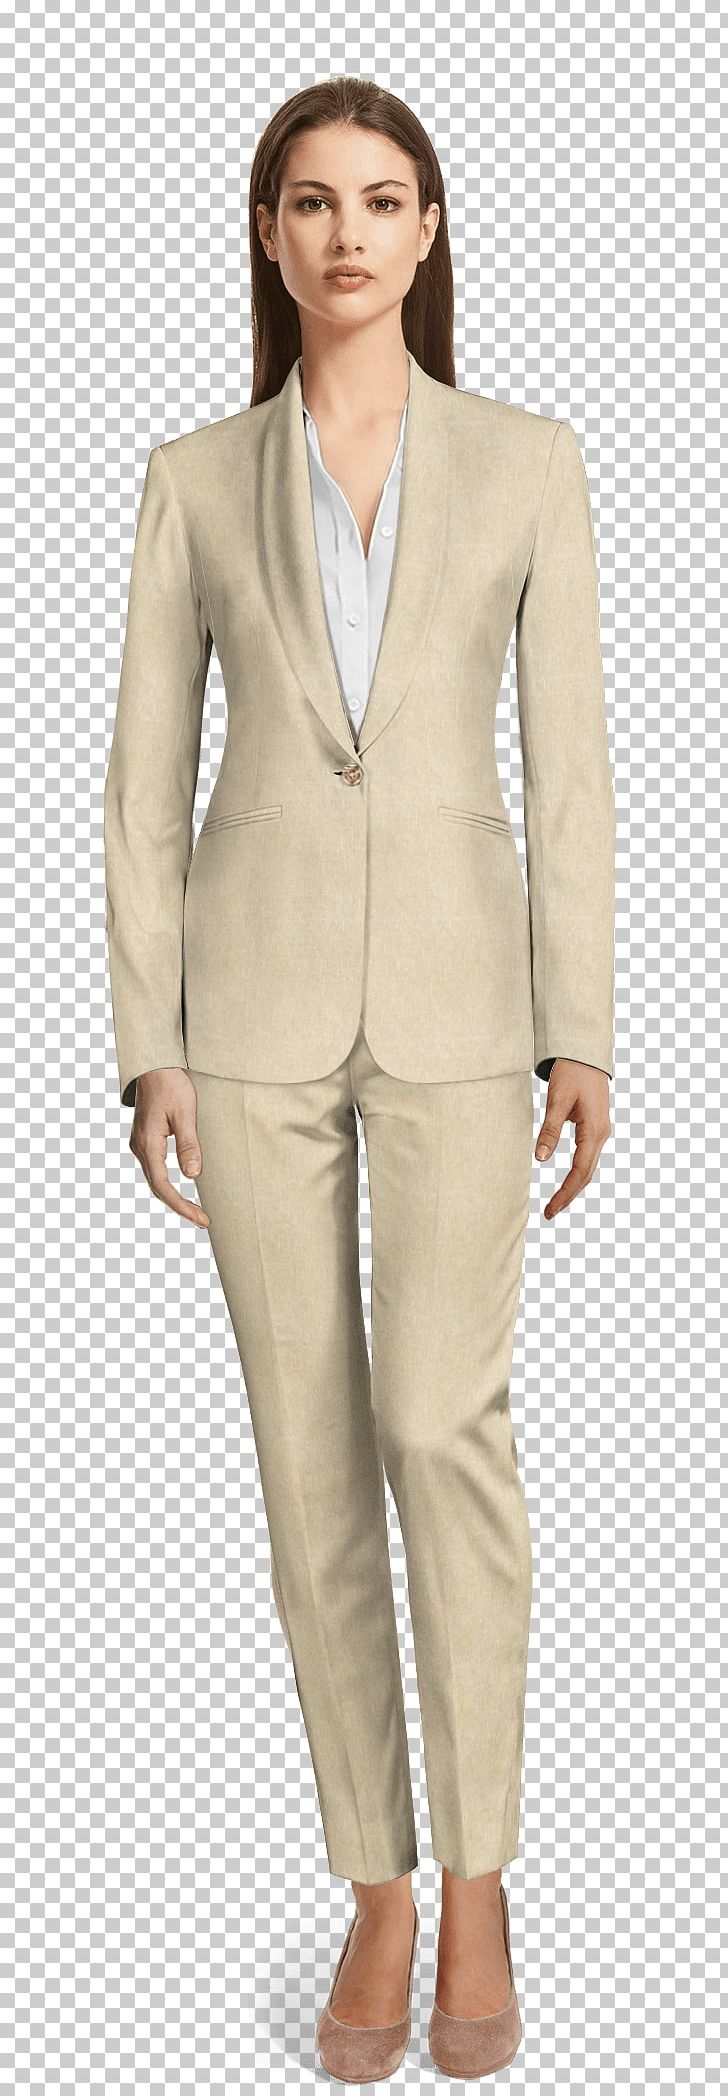 Pant Suits Lapel Double-breasted Single-breasted PNG, Clipart, Beige, Blazer, Clothing, Costume, Double Breasted Free PNG Download